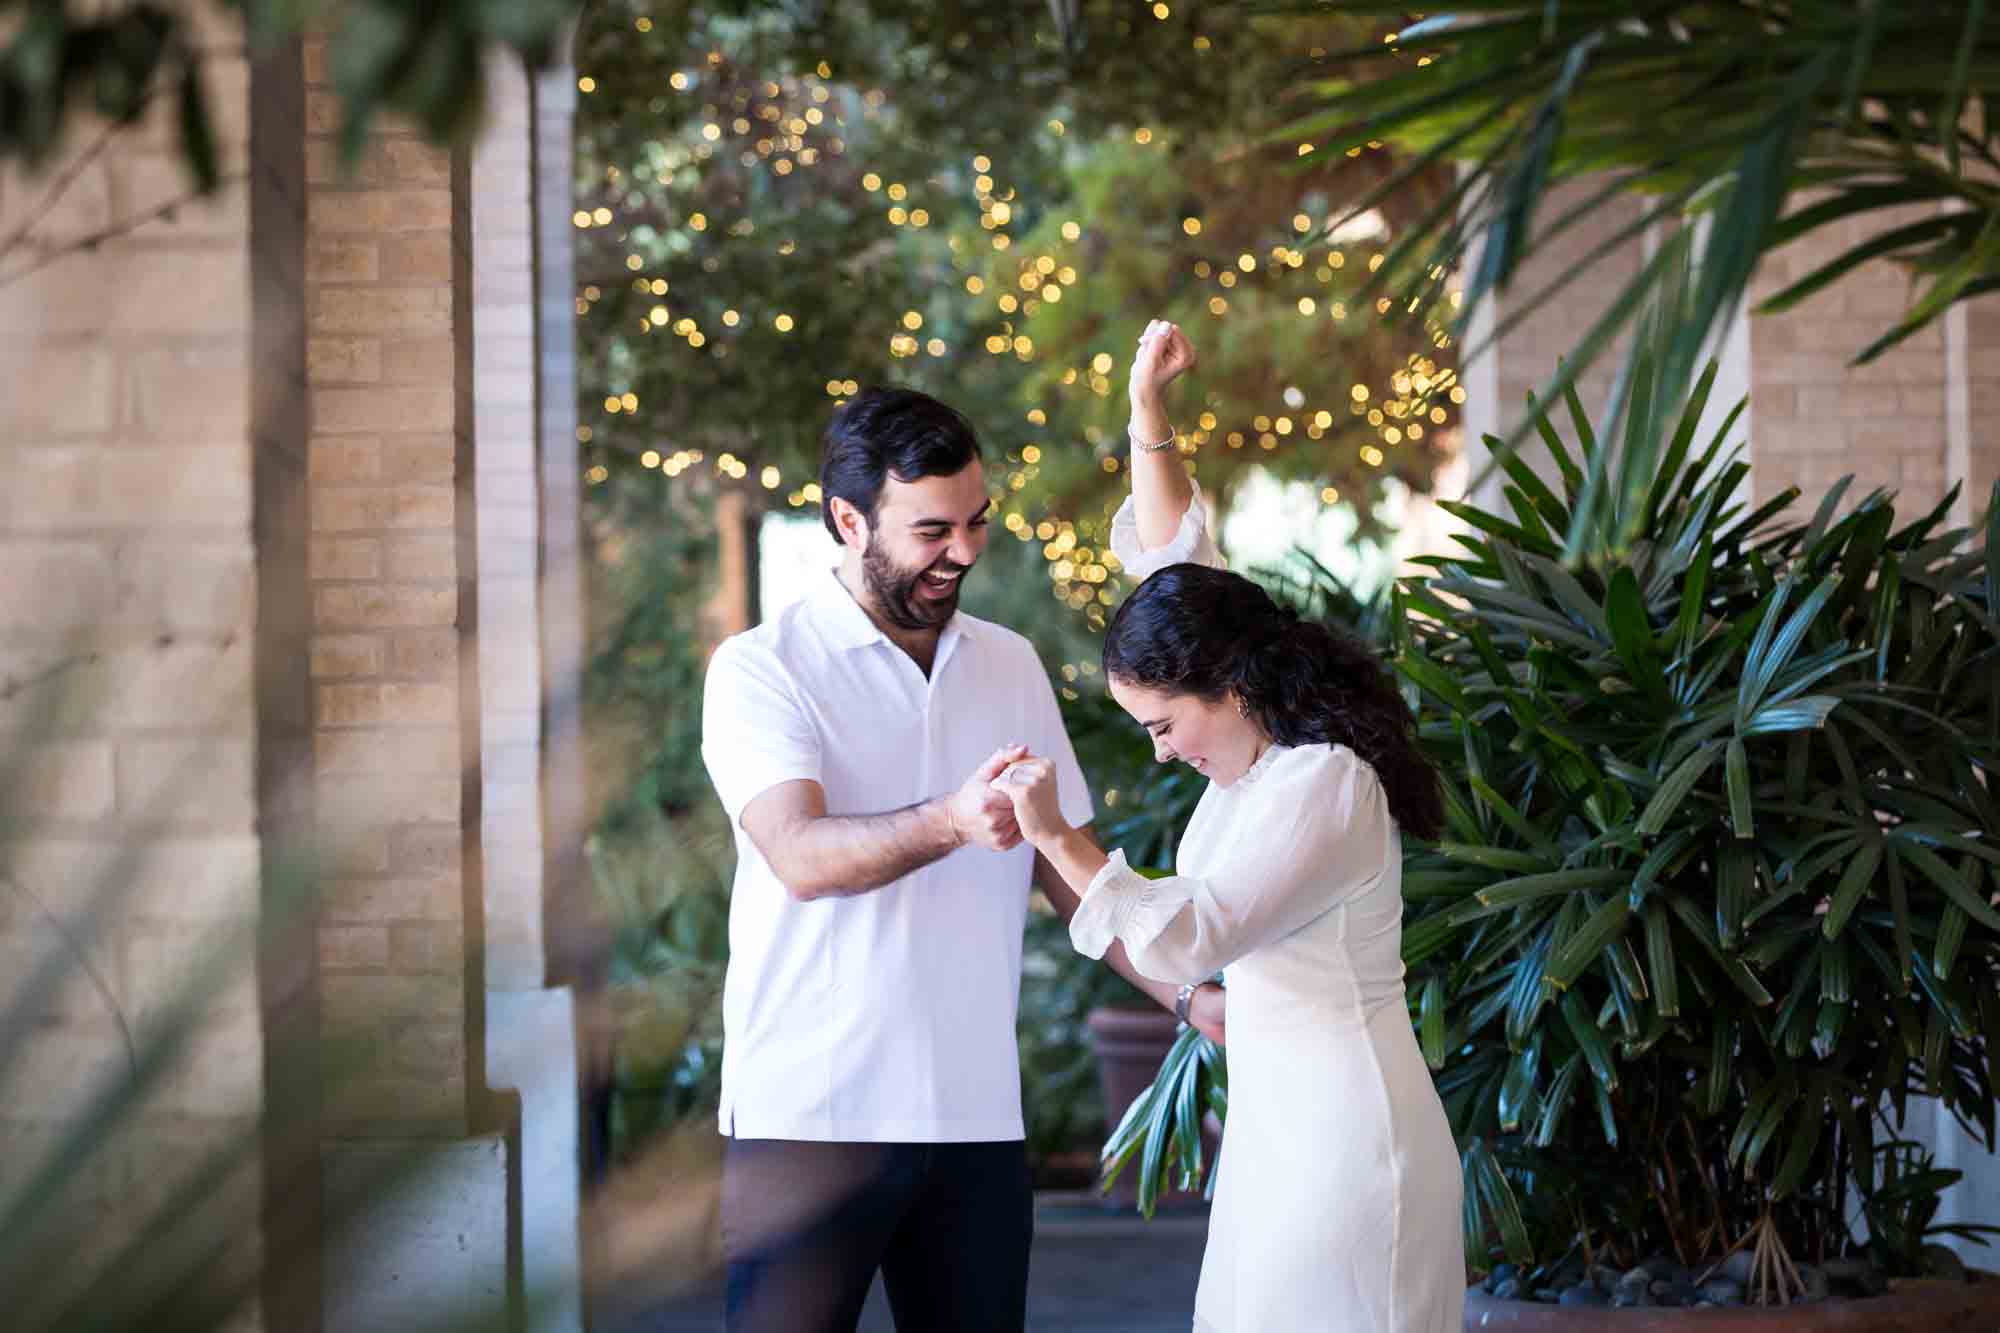 Couple dancing in front of palm trees on patio during a Pearl engagement portrait session